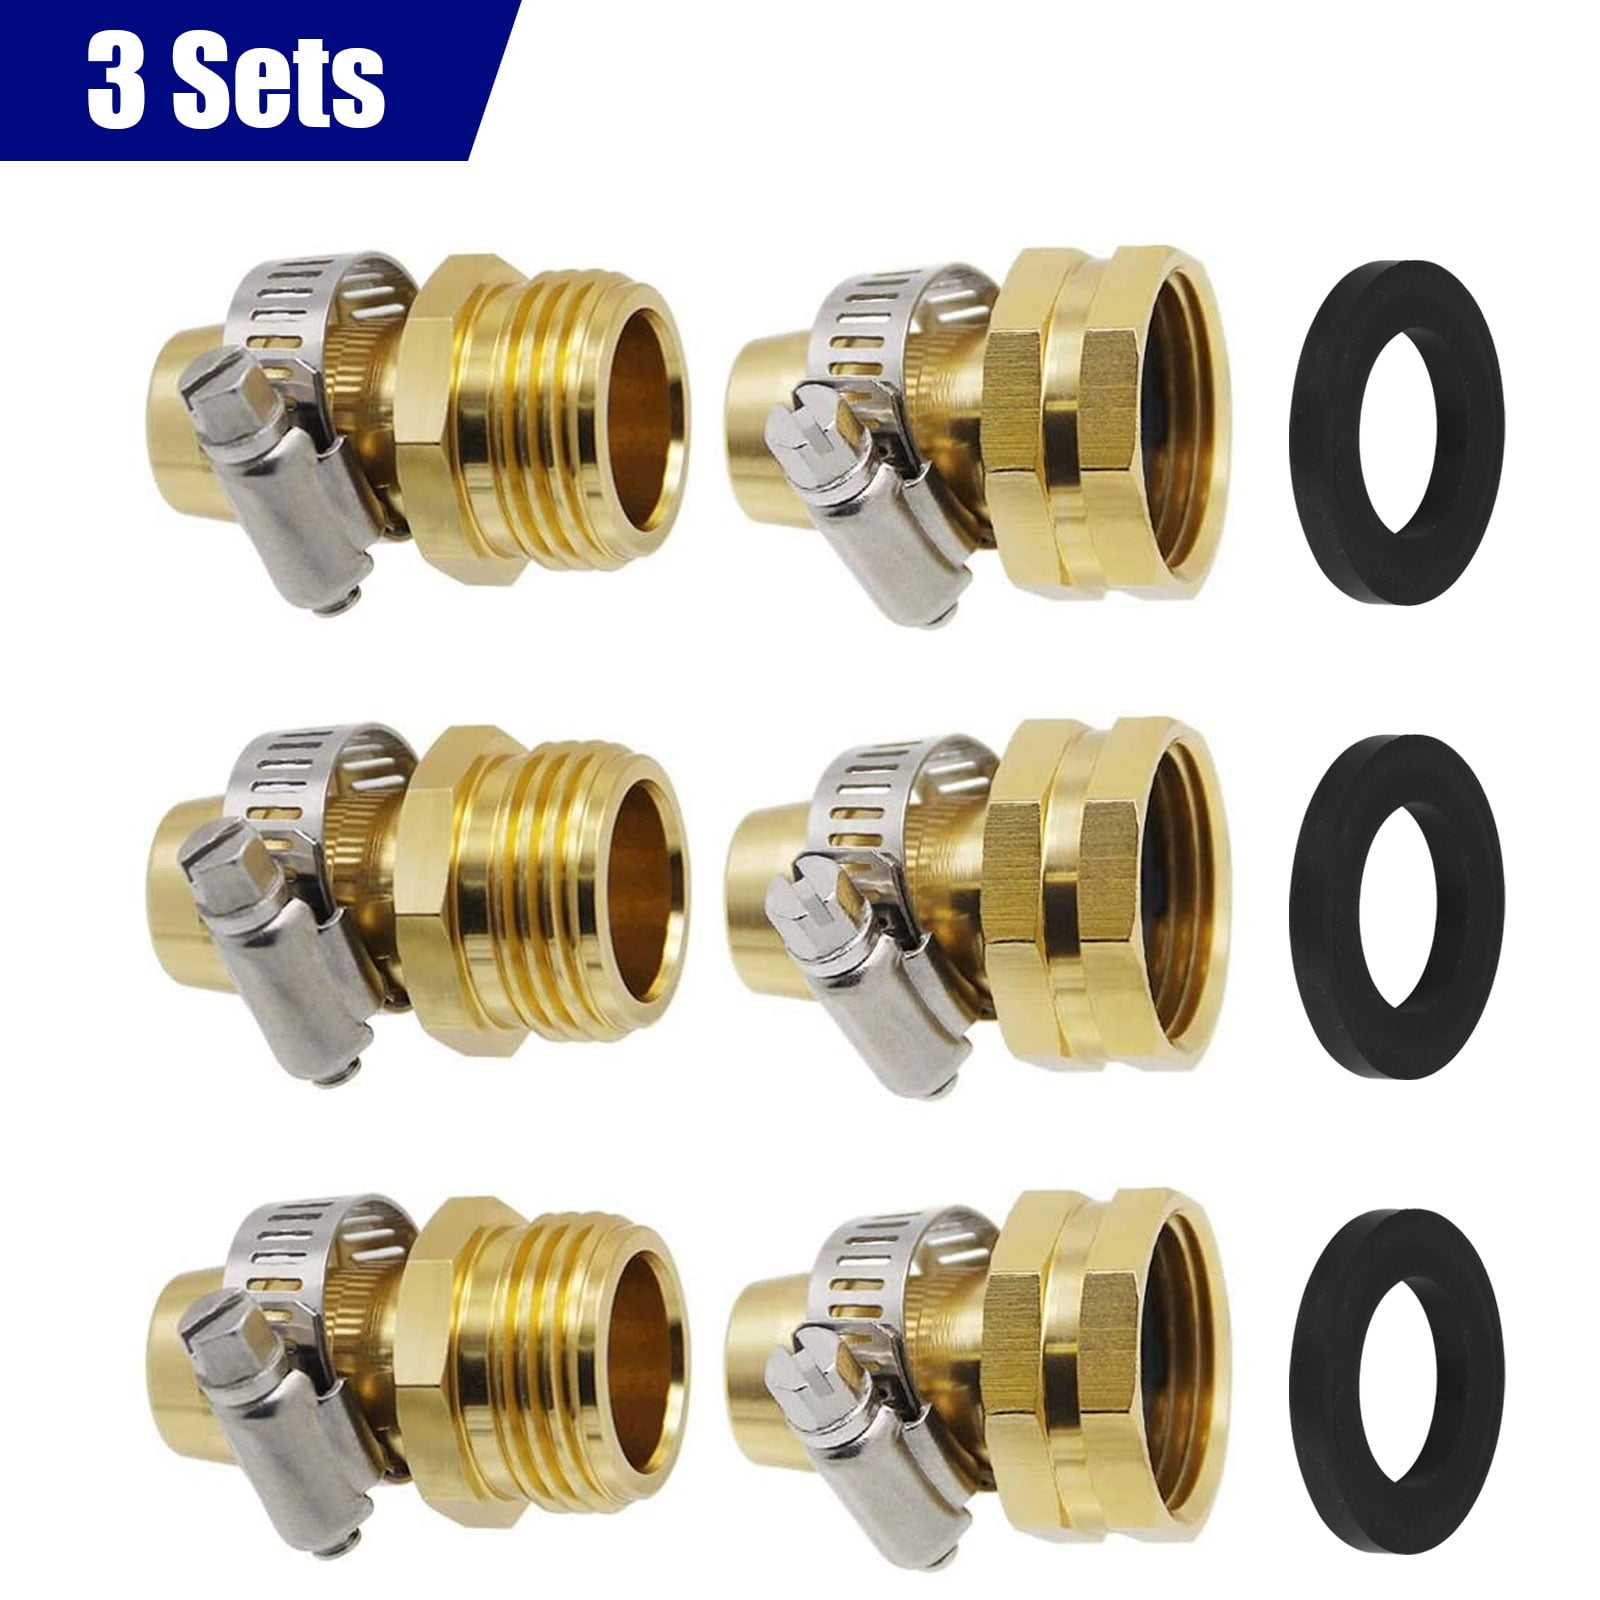 1/2" Copper Solid Brass Connector Set Garden Kit Water Hose Lock Quick Connect 